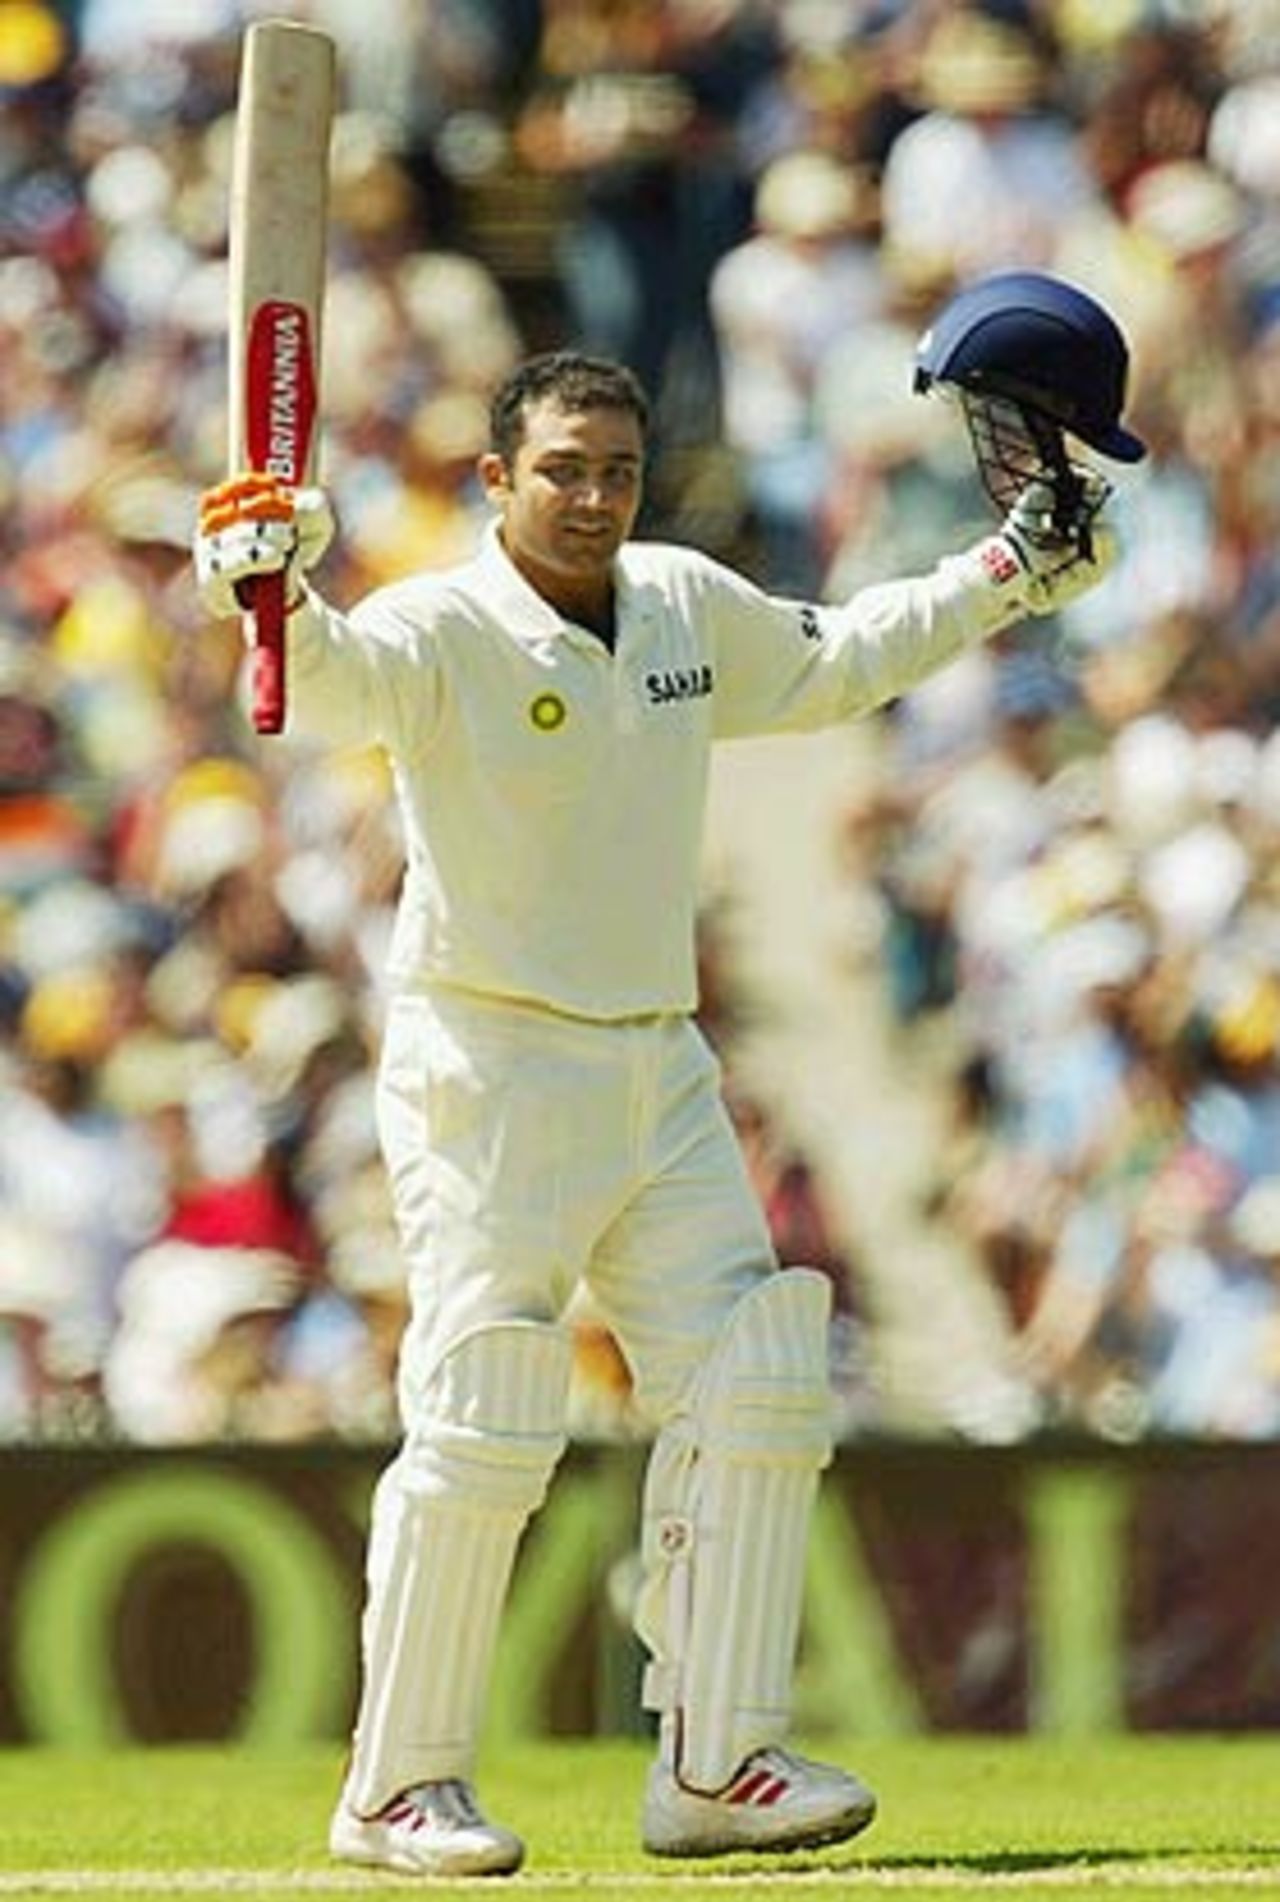 Technique, you say? Here, watch my elbow as I raise my bat. Virender Sehwag celebrates his century, Australia v India, 3rd Test, Melbourne, 1st day, December 26, 2003